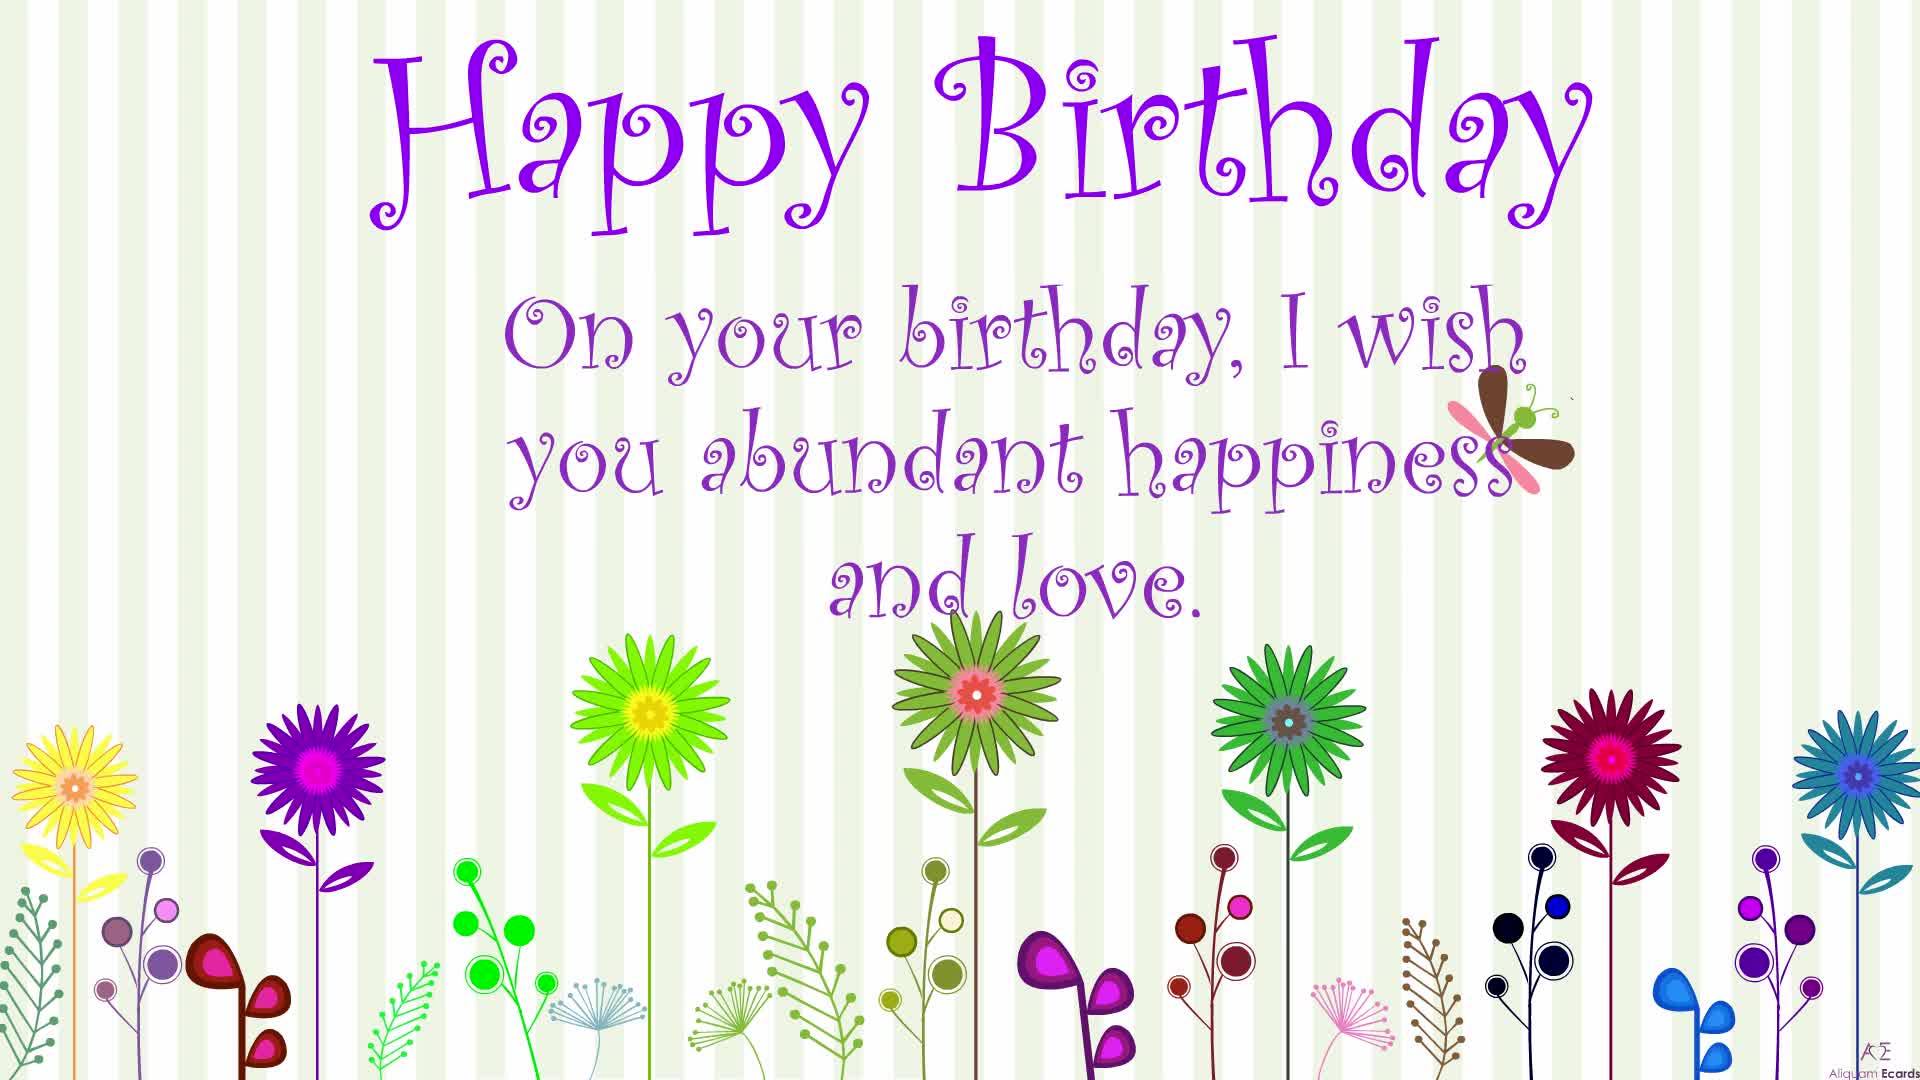 lovely message on birthday image